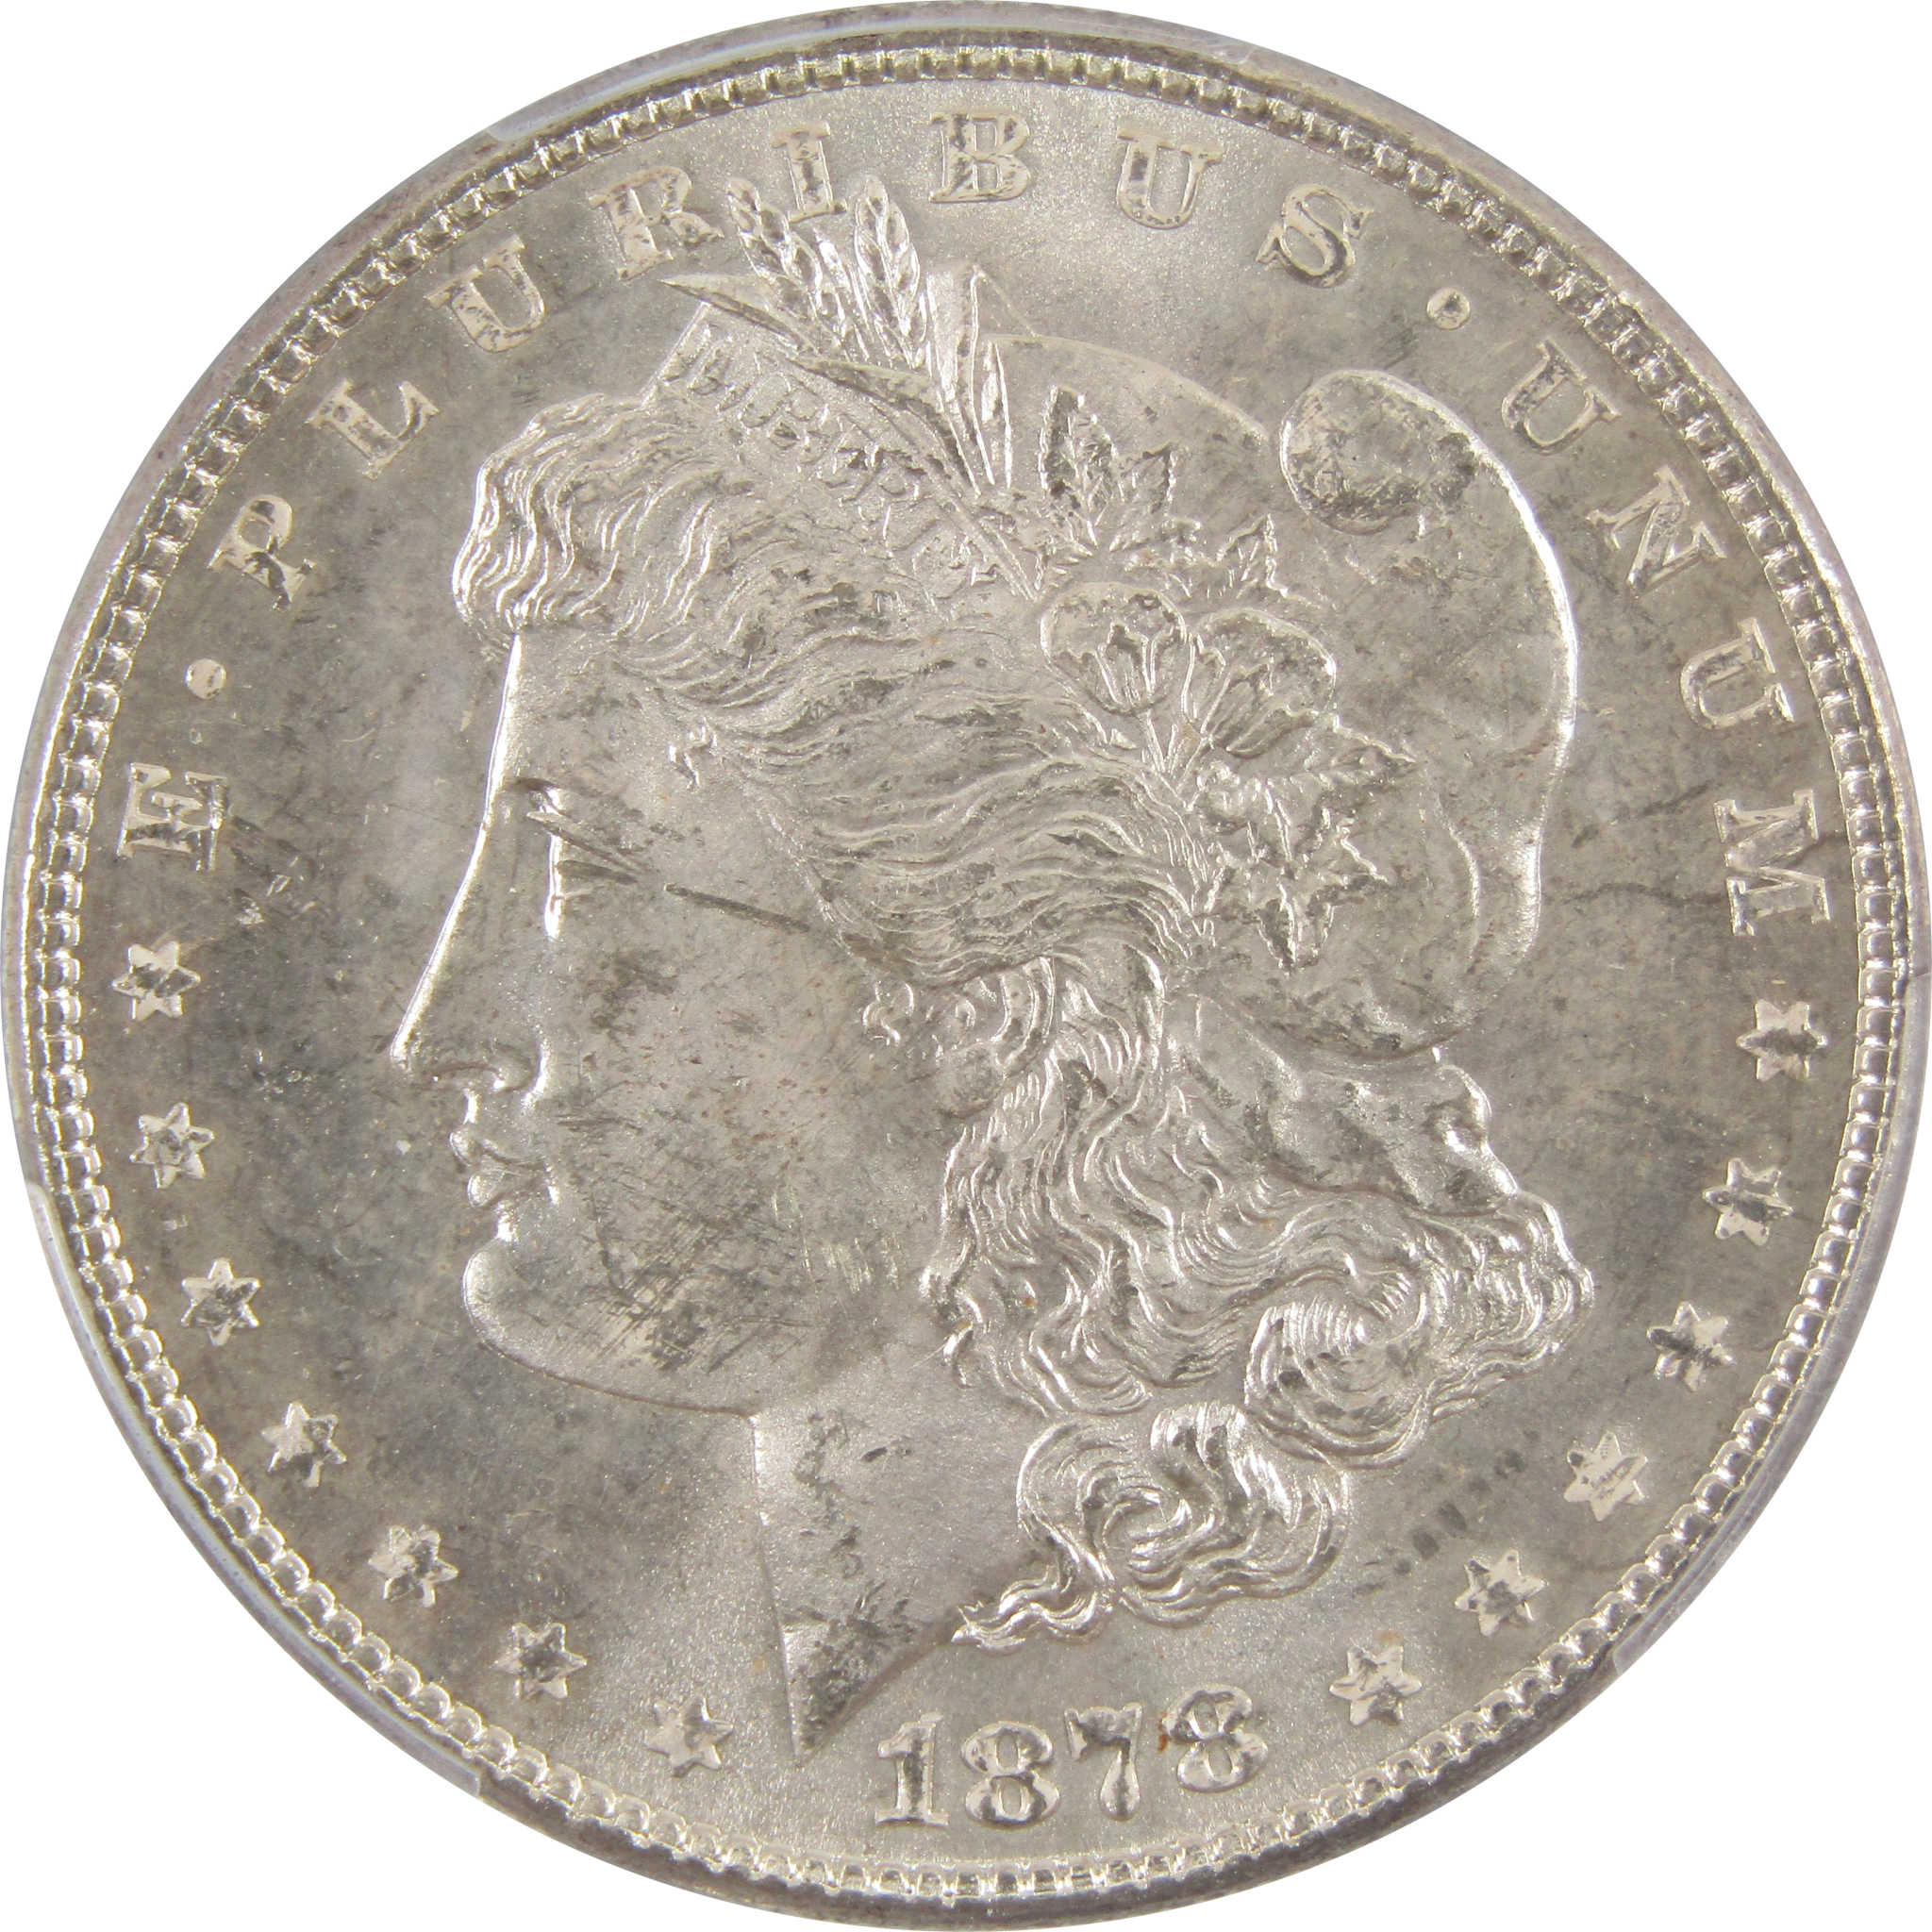 1878 7TF Rev 78 Morgan Dollar MS 64 PCGS 90% Silver $1 SKU:I11199 - Morgan coin - Morgan silver dollar - Morgan silver dollar for sale - Profile Coins &amp; Collectibles